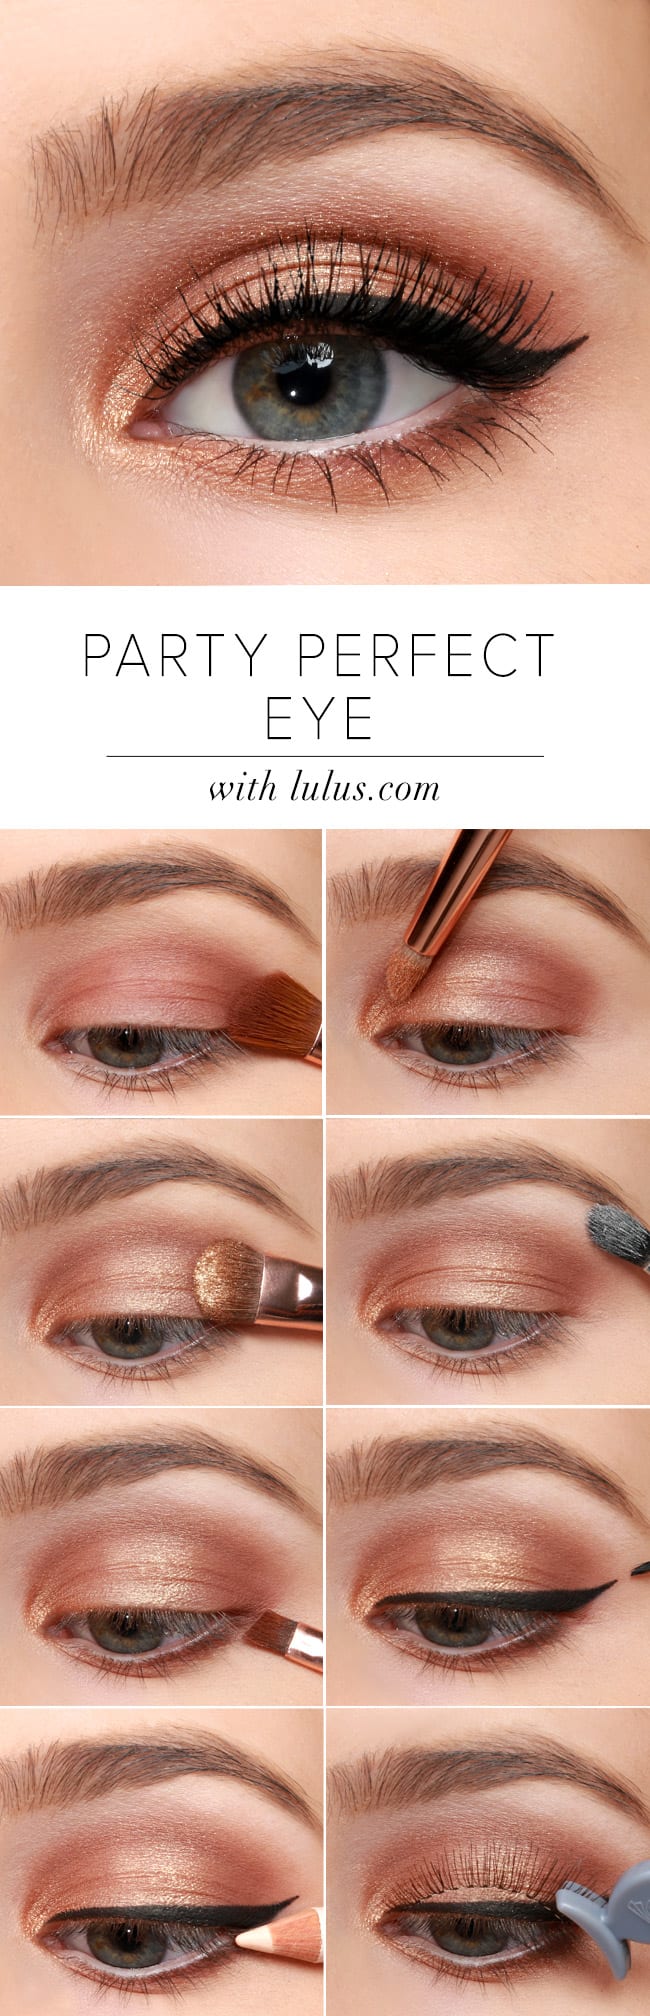 How-To: Party Perfect Eye Makeup Tutorial - Lulus.com Fashion Blog